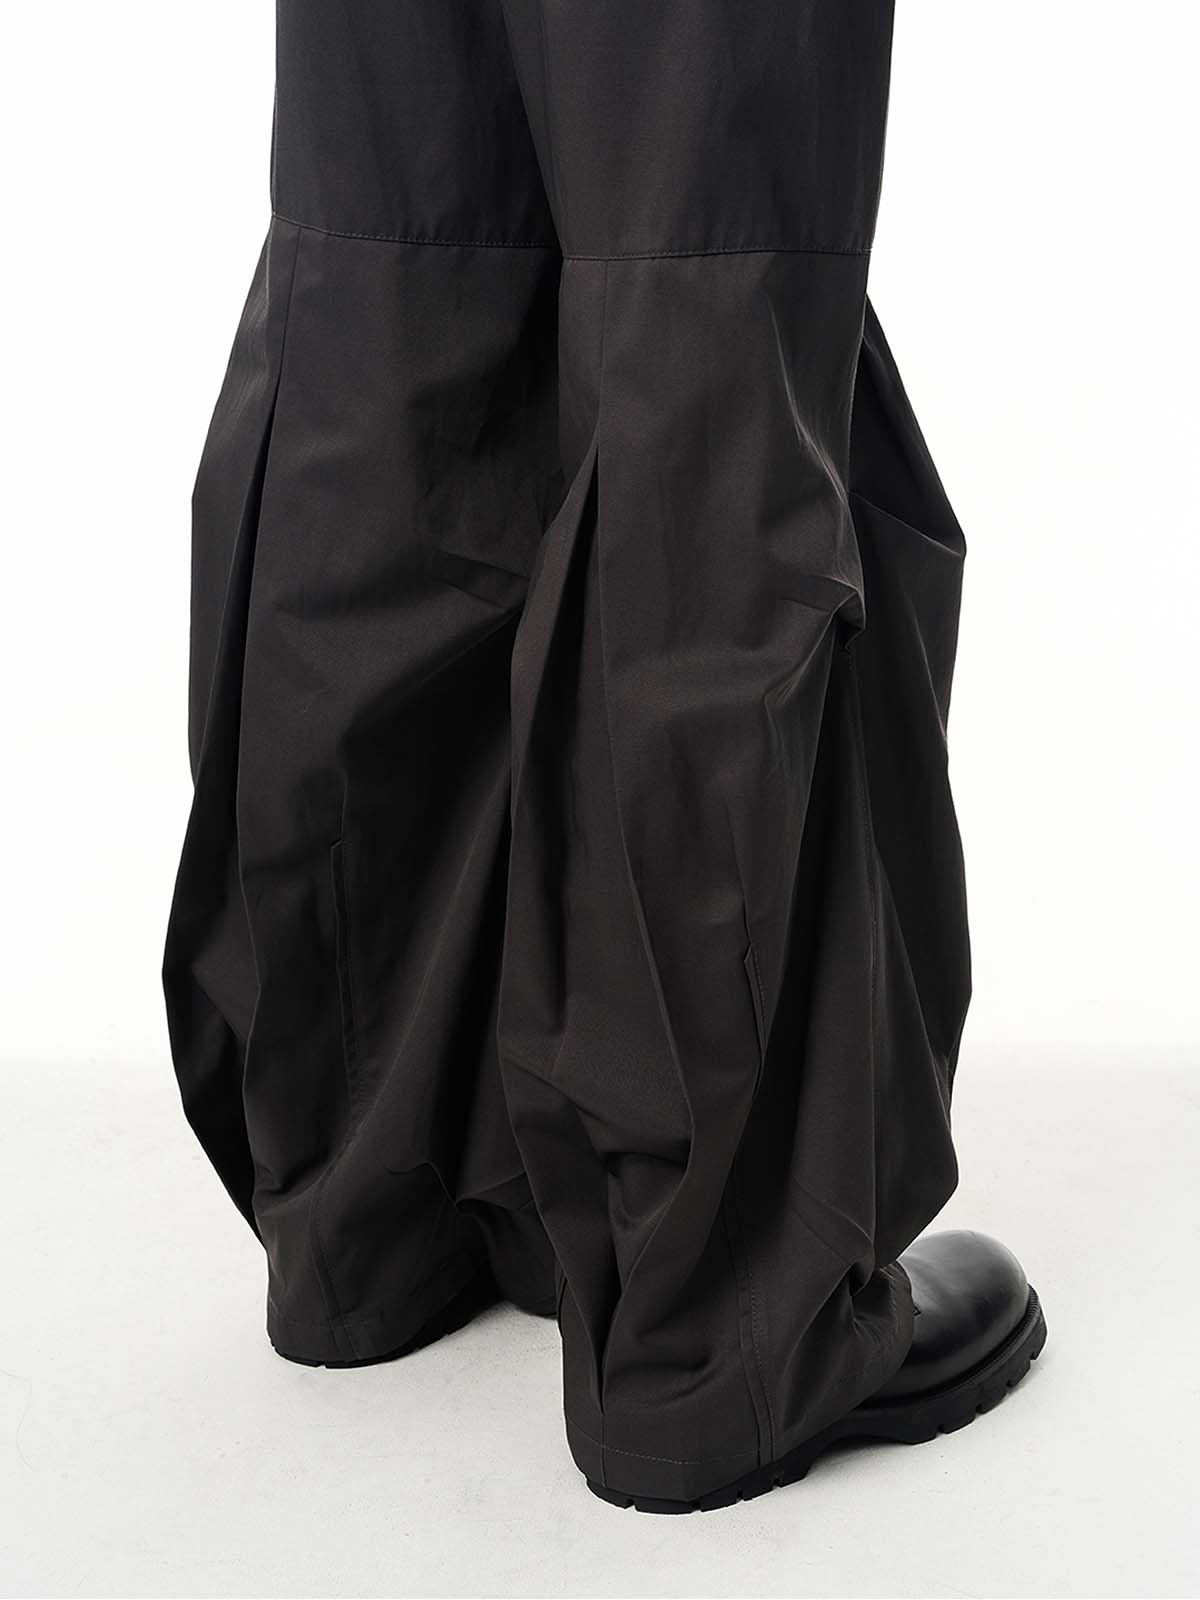 Loose-fitting pleated casual pants